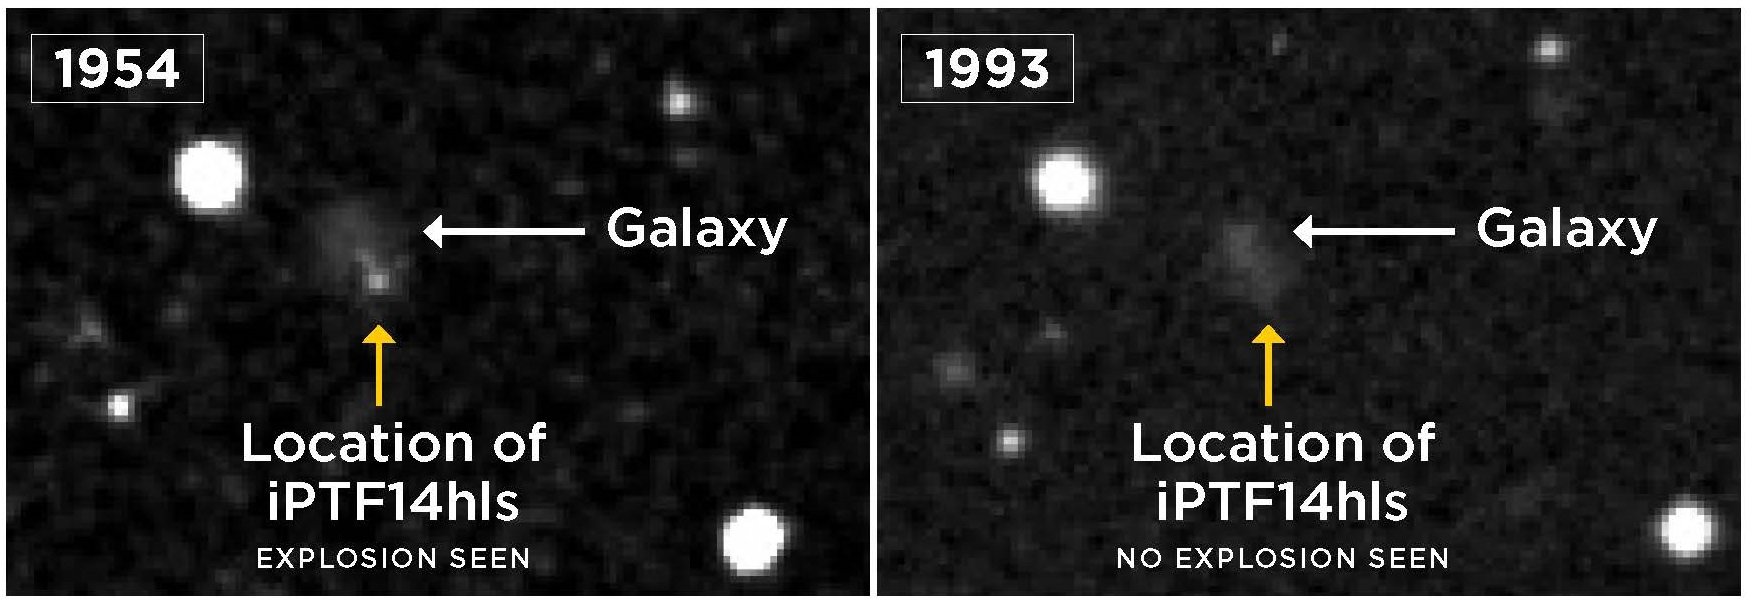 Star exploded, survived, and exploded again more than 50 years later